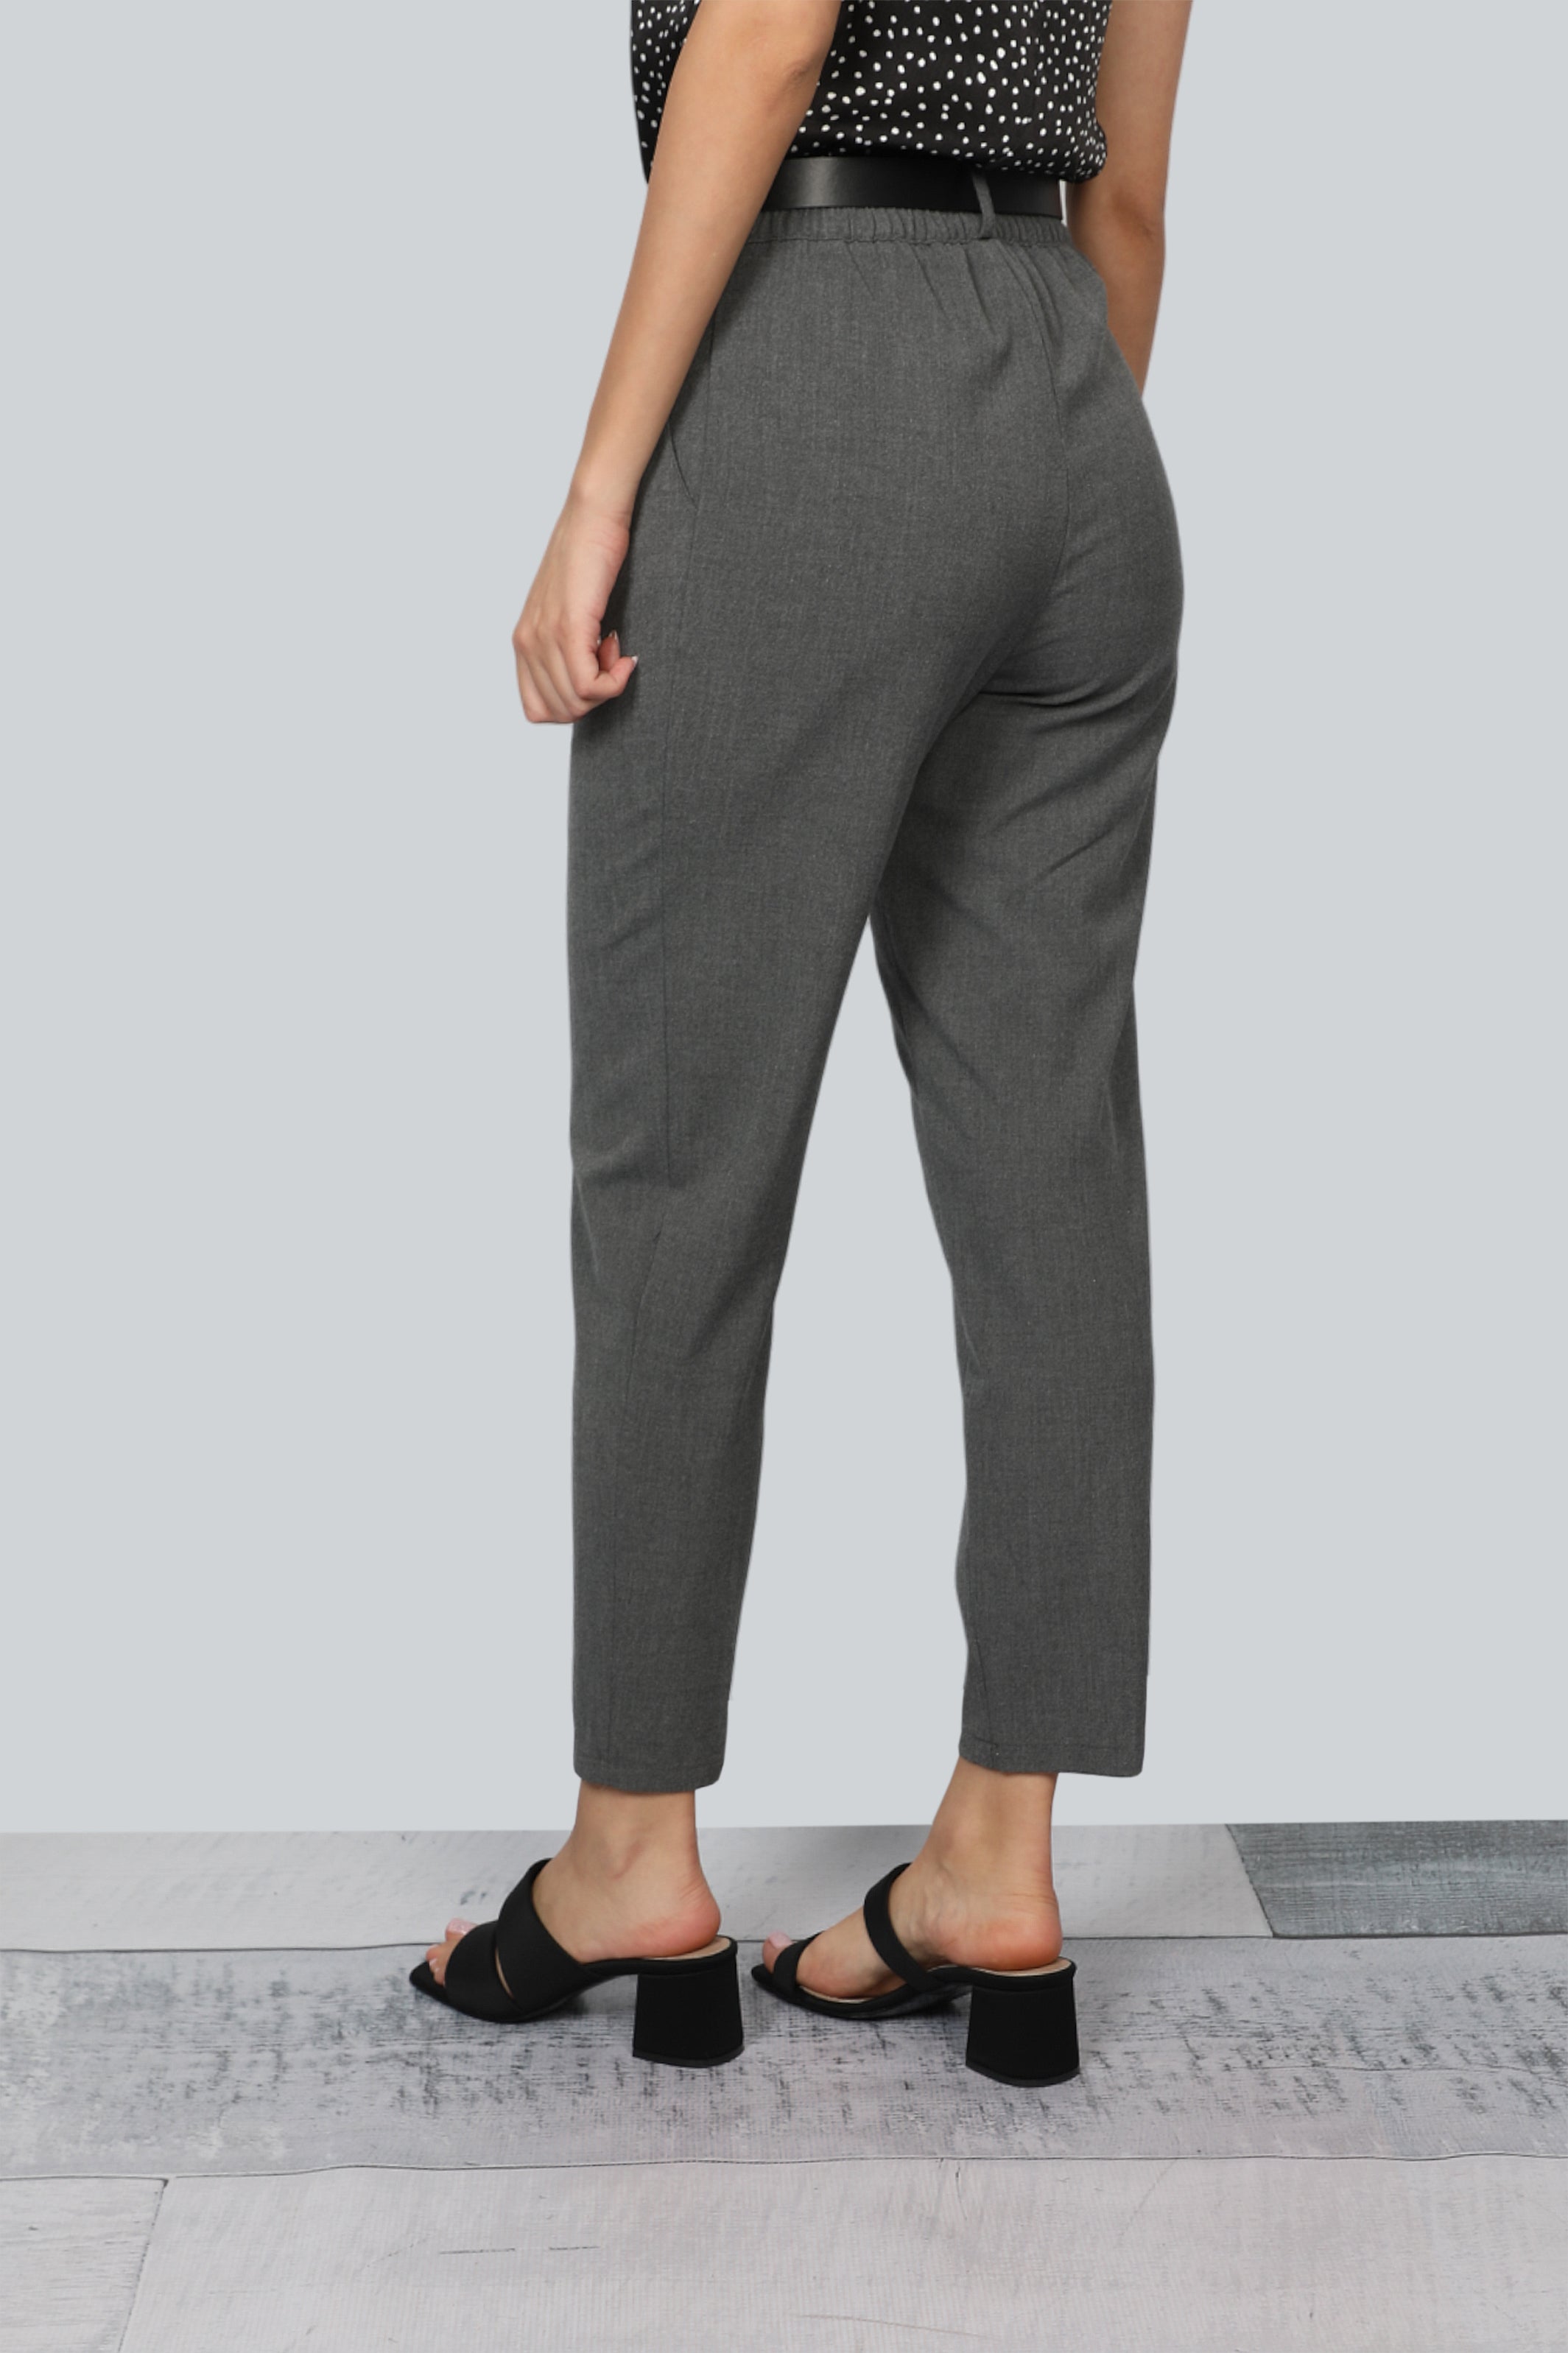 Grey Sport Chic Pants Belted